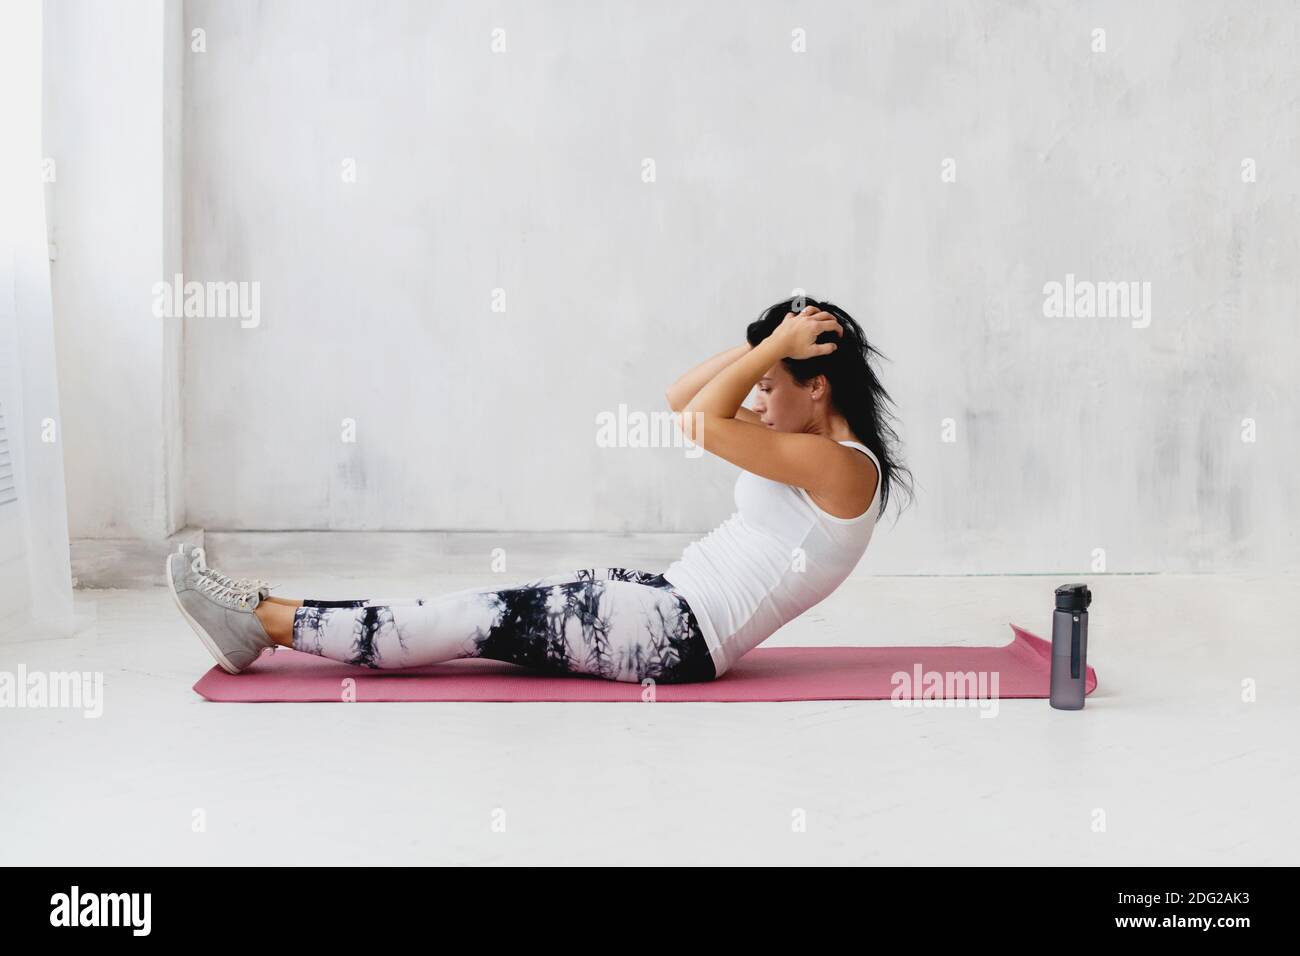 Woman lying on athletic mat and making an abs workout. Stock Photo